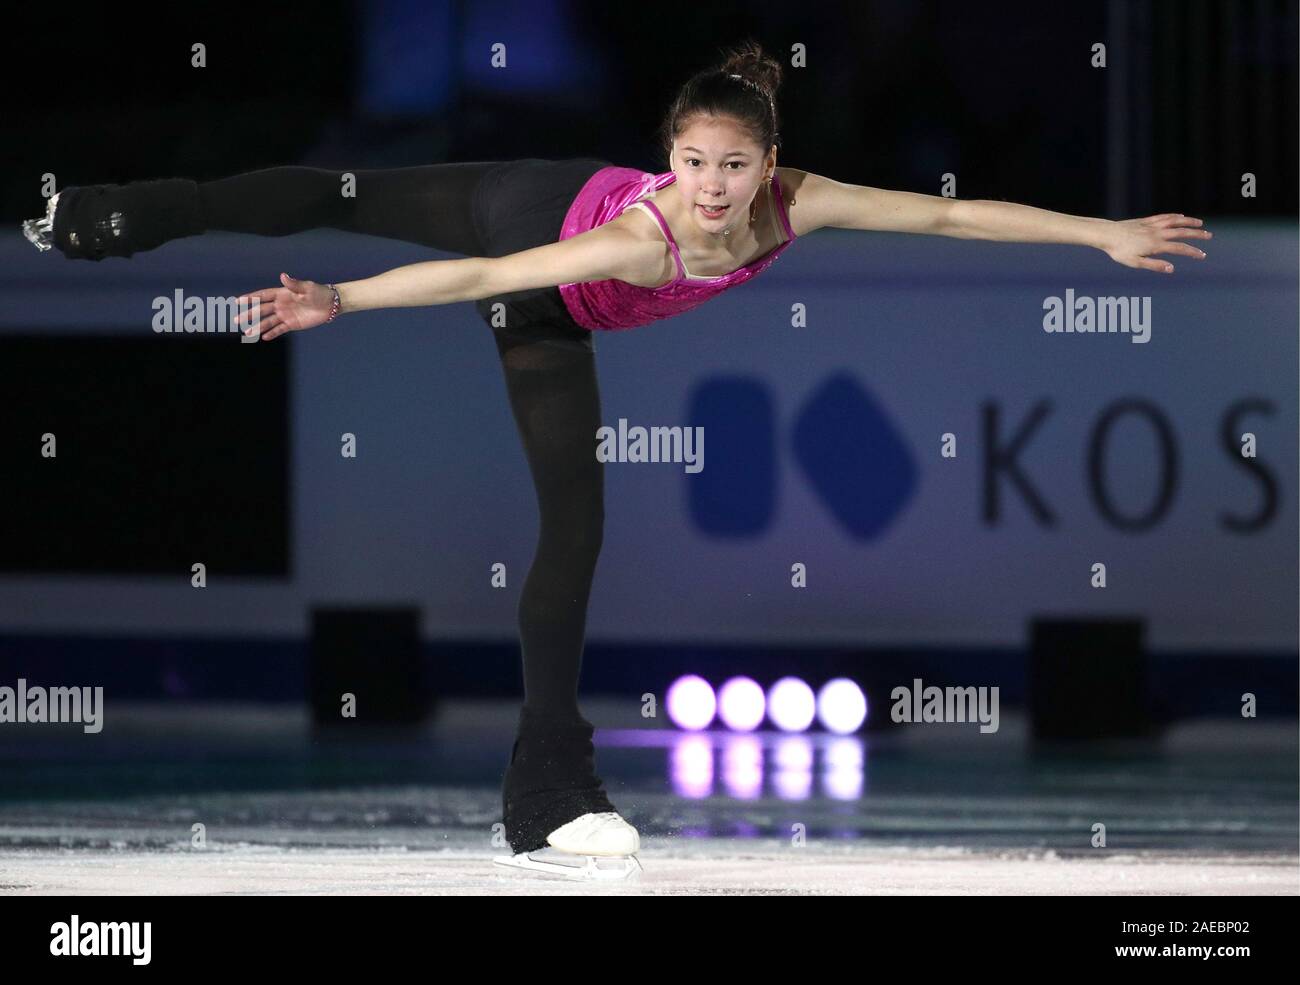 Turin, Italy. 08th Dec, 2019. TURIN, ITALY - DECEMBER 8, 2019: Junior figure  skater Alysa Liu of the United States performs during an exhibition gala at  the 2019-20 ISU Grand Prix of